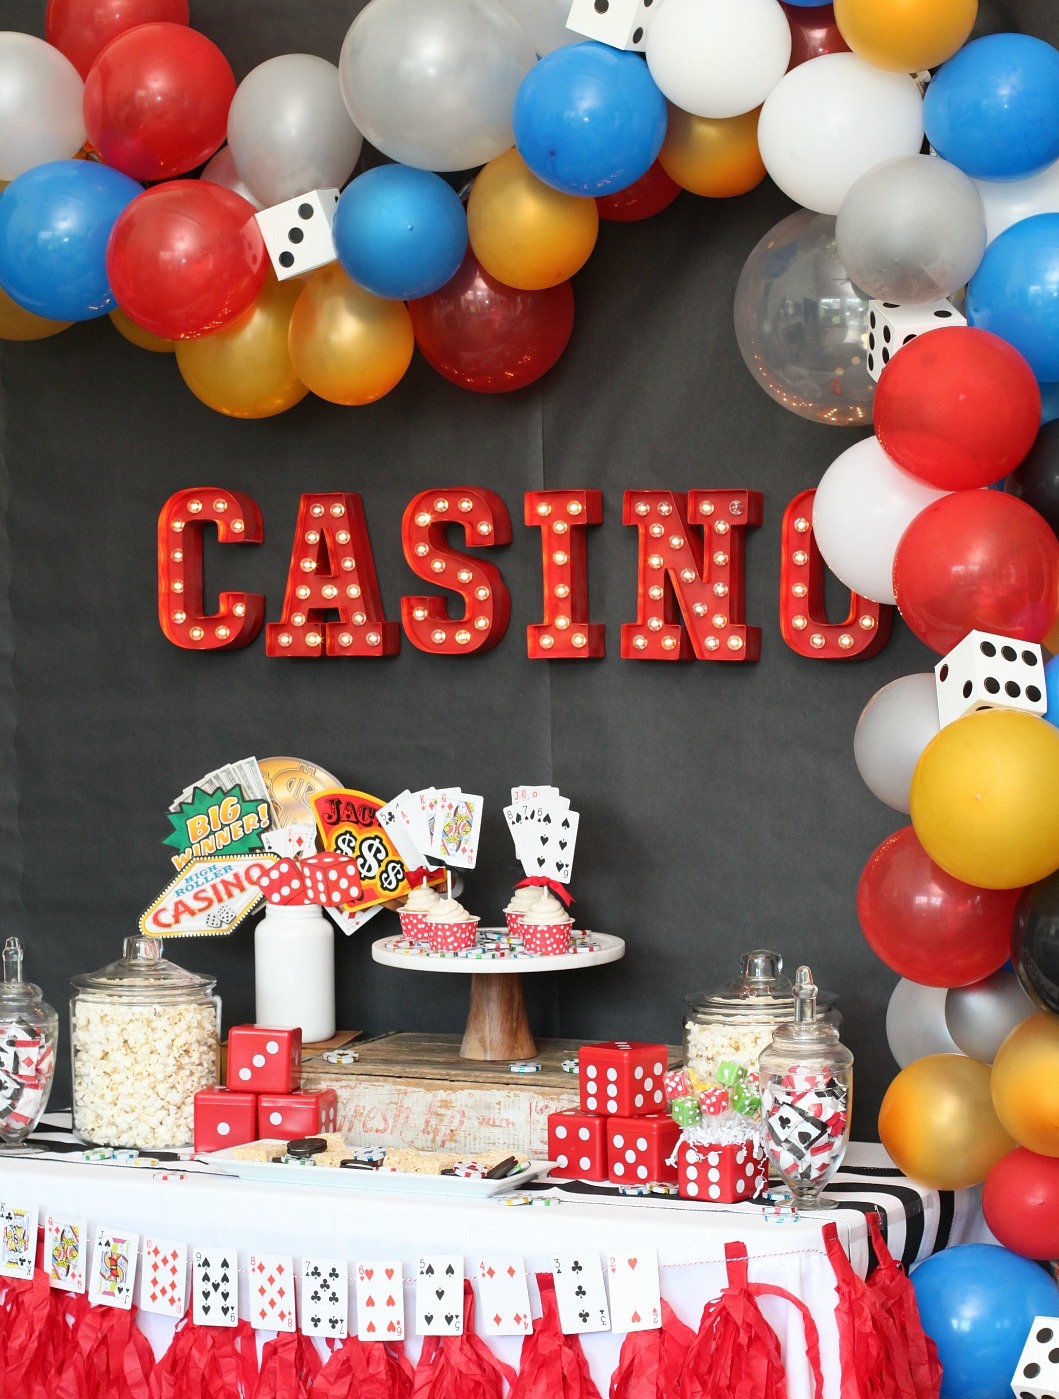 Casino Night Birthday Party for Adults: Budget Friendly Yet